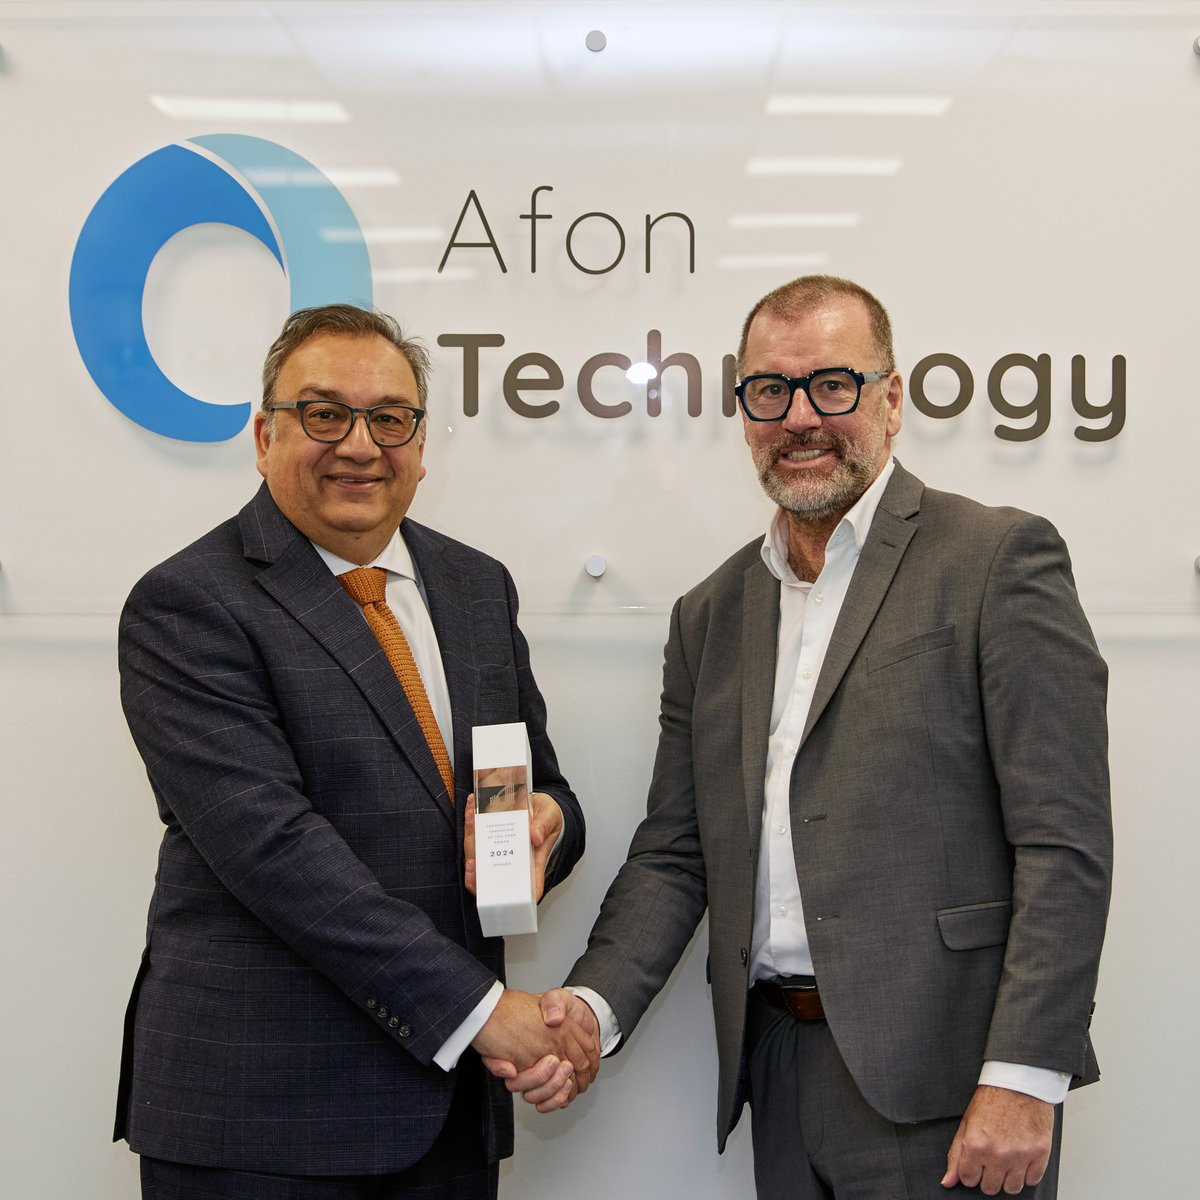 Congratulations to Sabih Chaudhry &  Afon Technology Ltd for winning the 2024 Junkosha Technology Innovator of the Year Award with Glucowear! 

Thanks to everyone who participated and helped make this initiative a success.

#Junkosha #EnablingTechnologyInnovators #InnovatorAwards